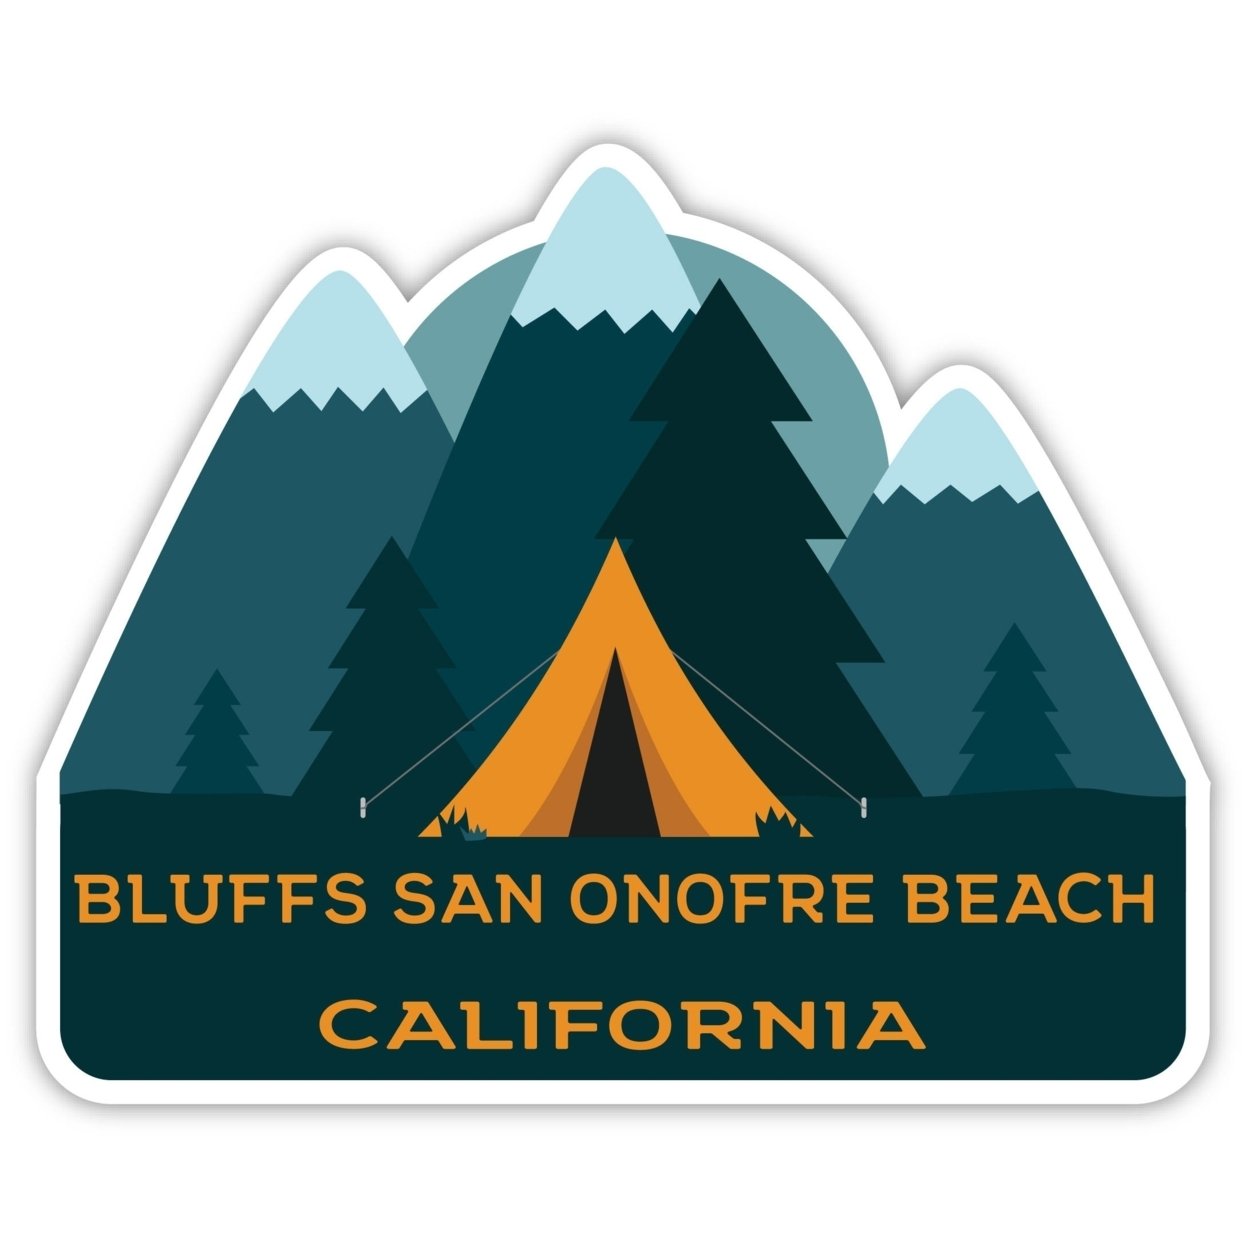 Bluffs San Onofre Beach California Souvenir Decorative Stickers (Choose Theme And Size) - 4-Pack, 2-Inch, Tent